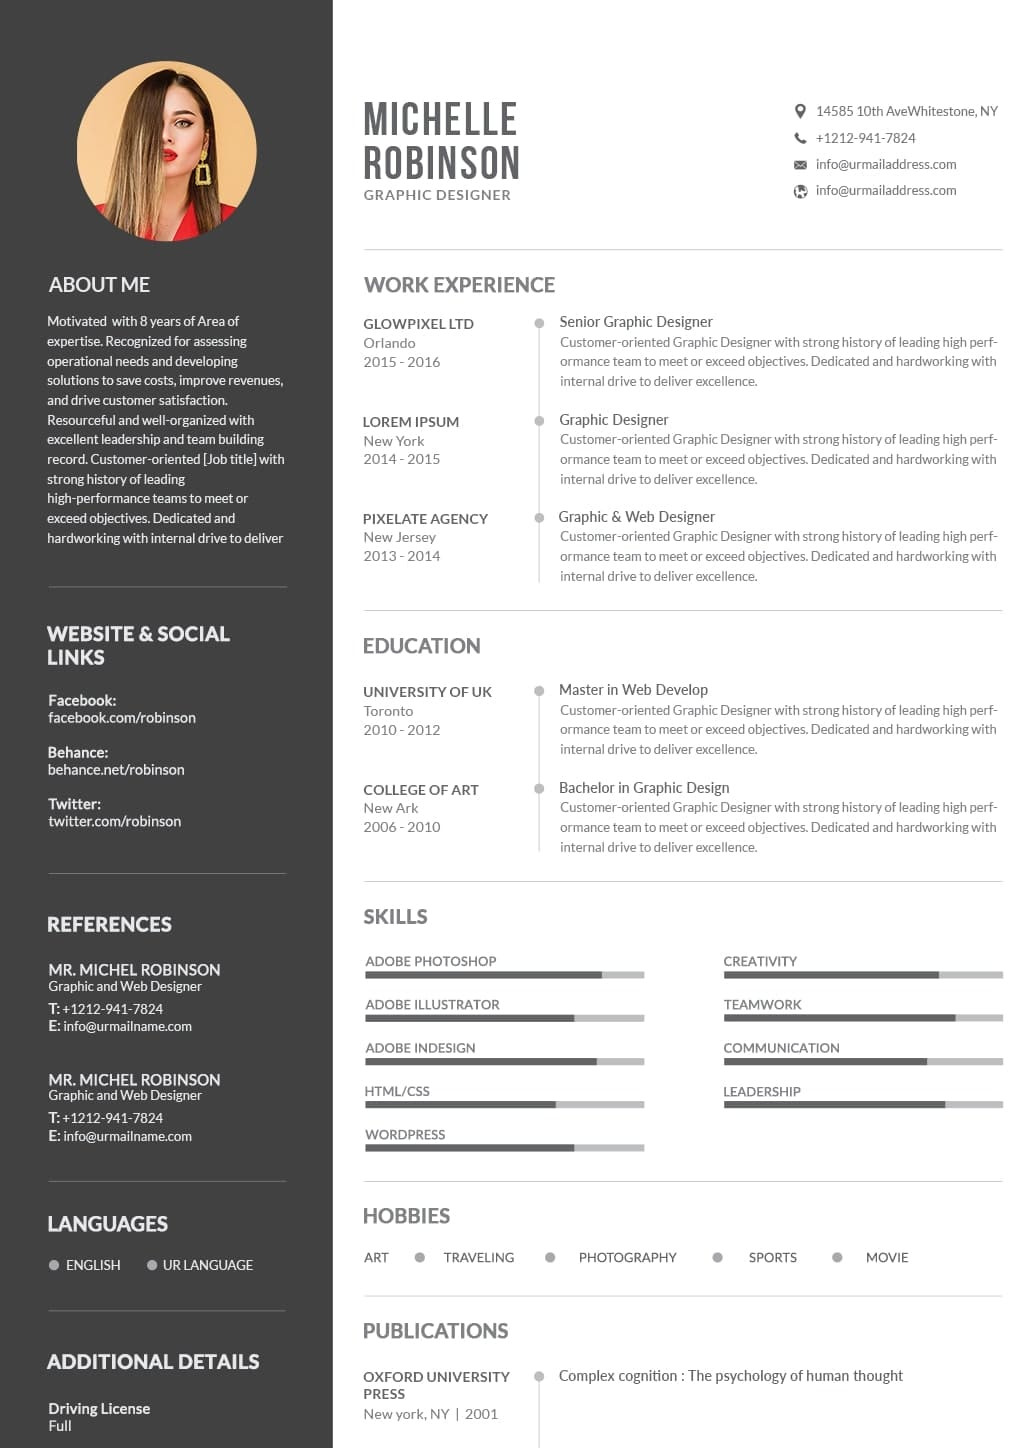 Sample Resume Repair Request form Template Resume Templates to Stand Out – Resume Example